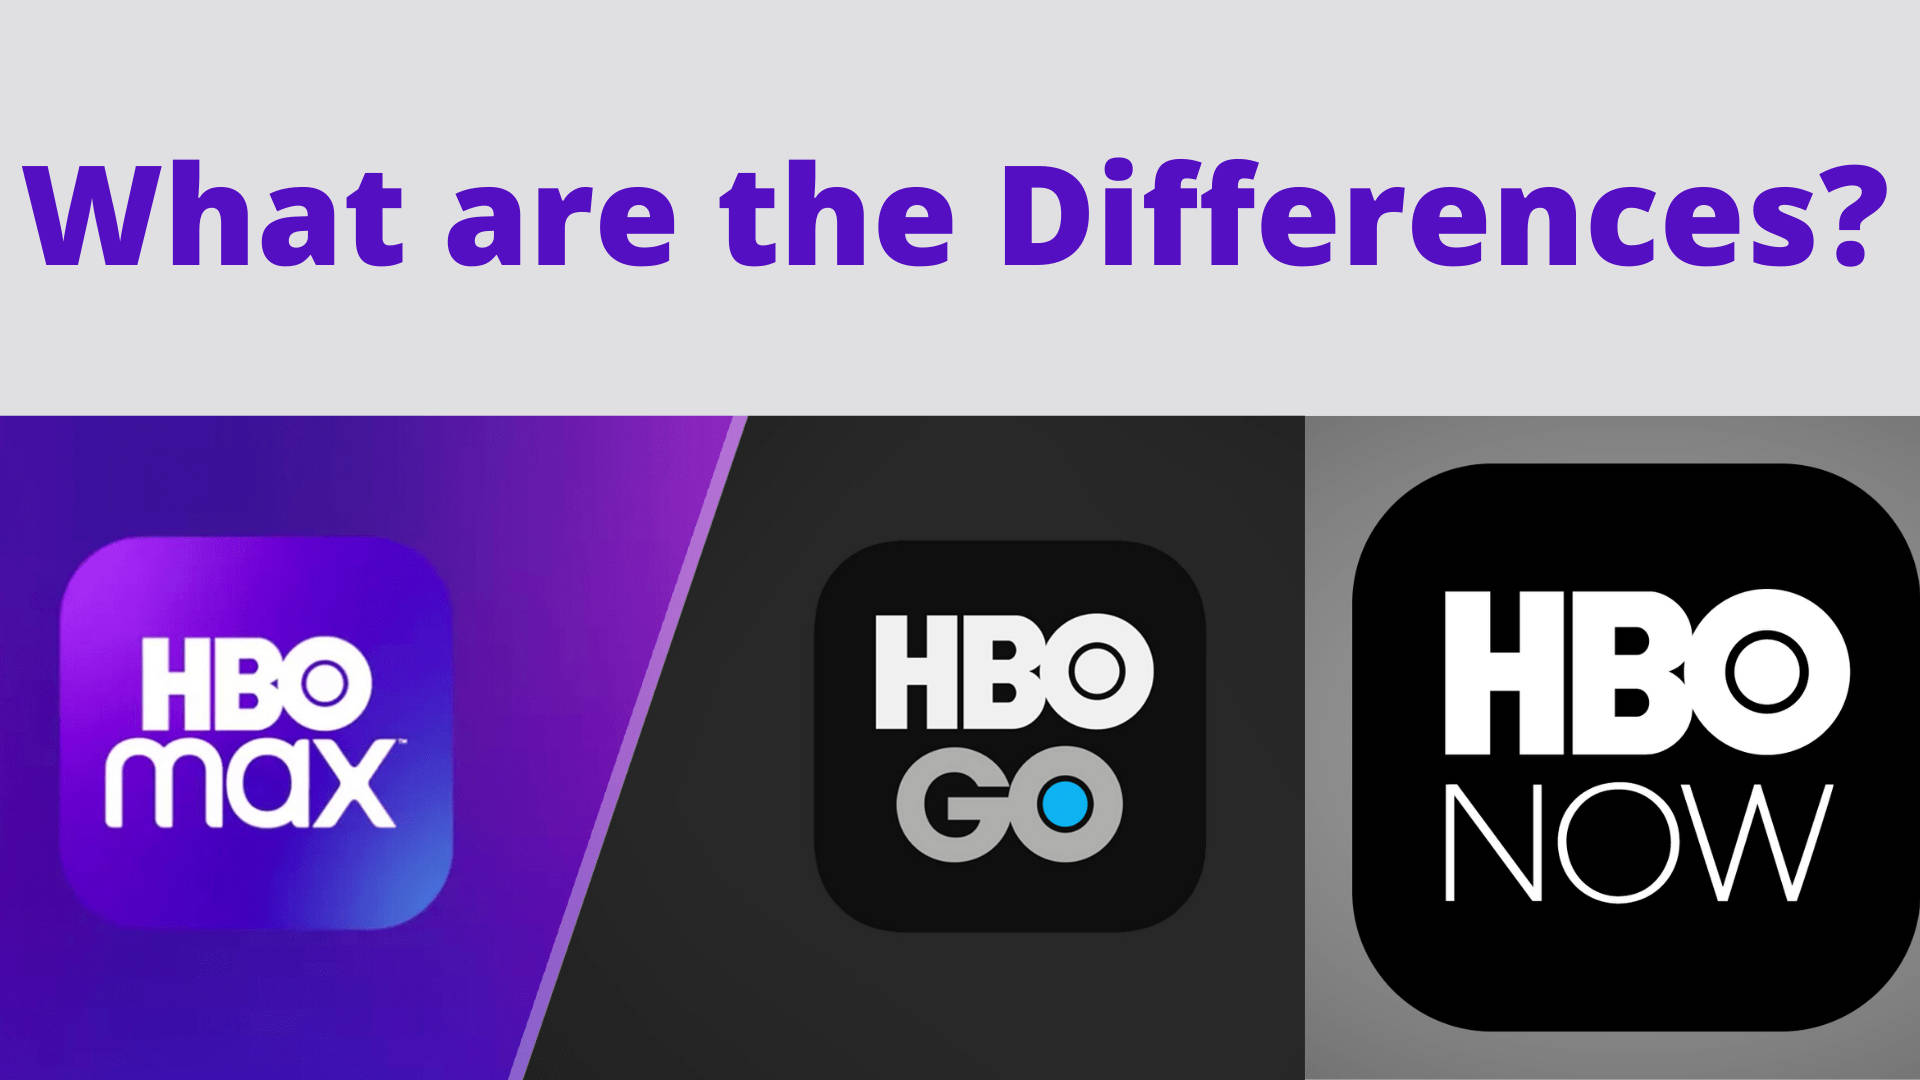 HBO Evolution Differences Background